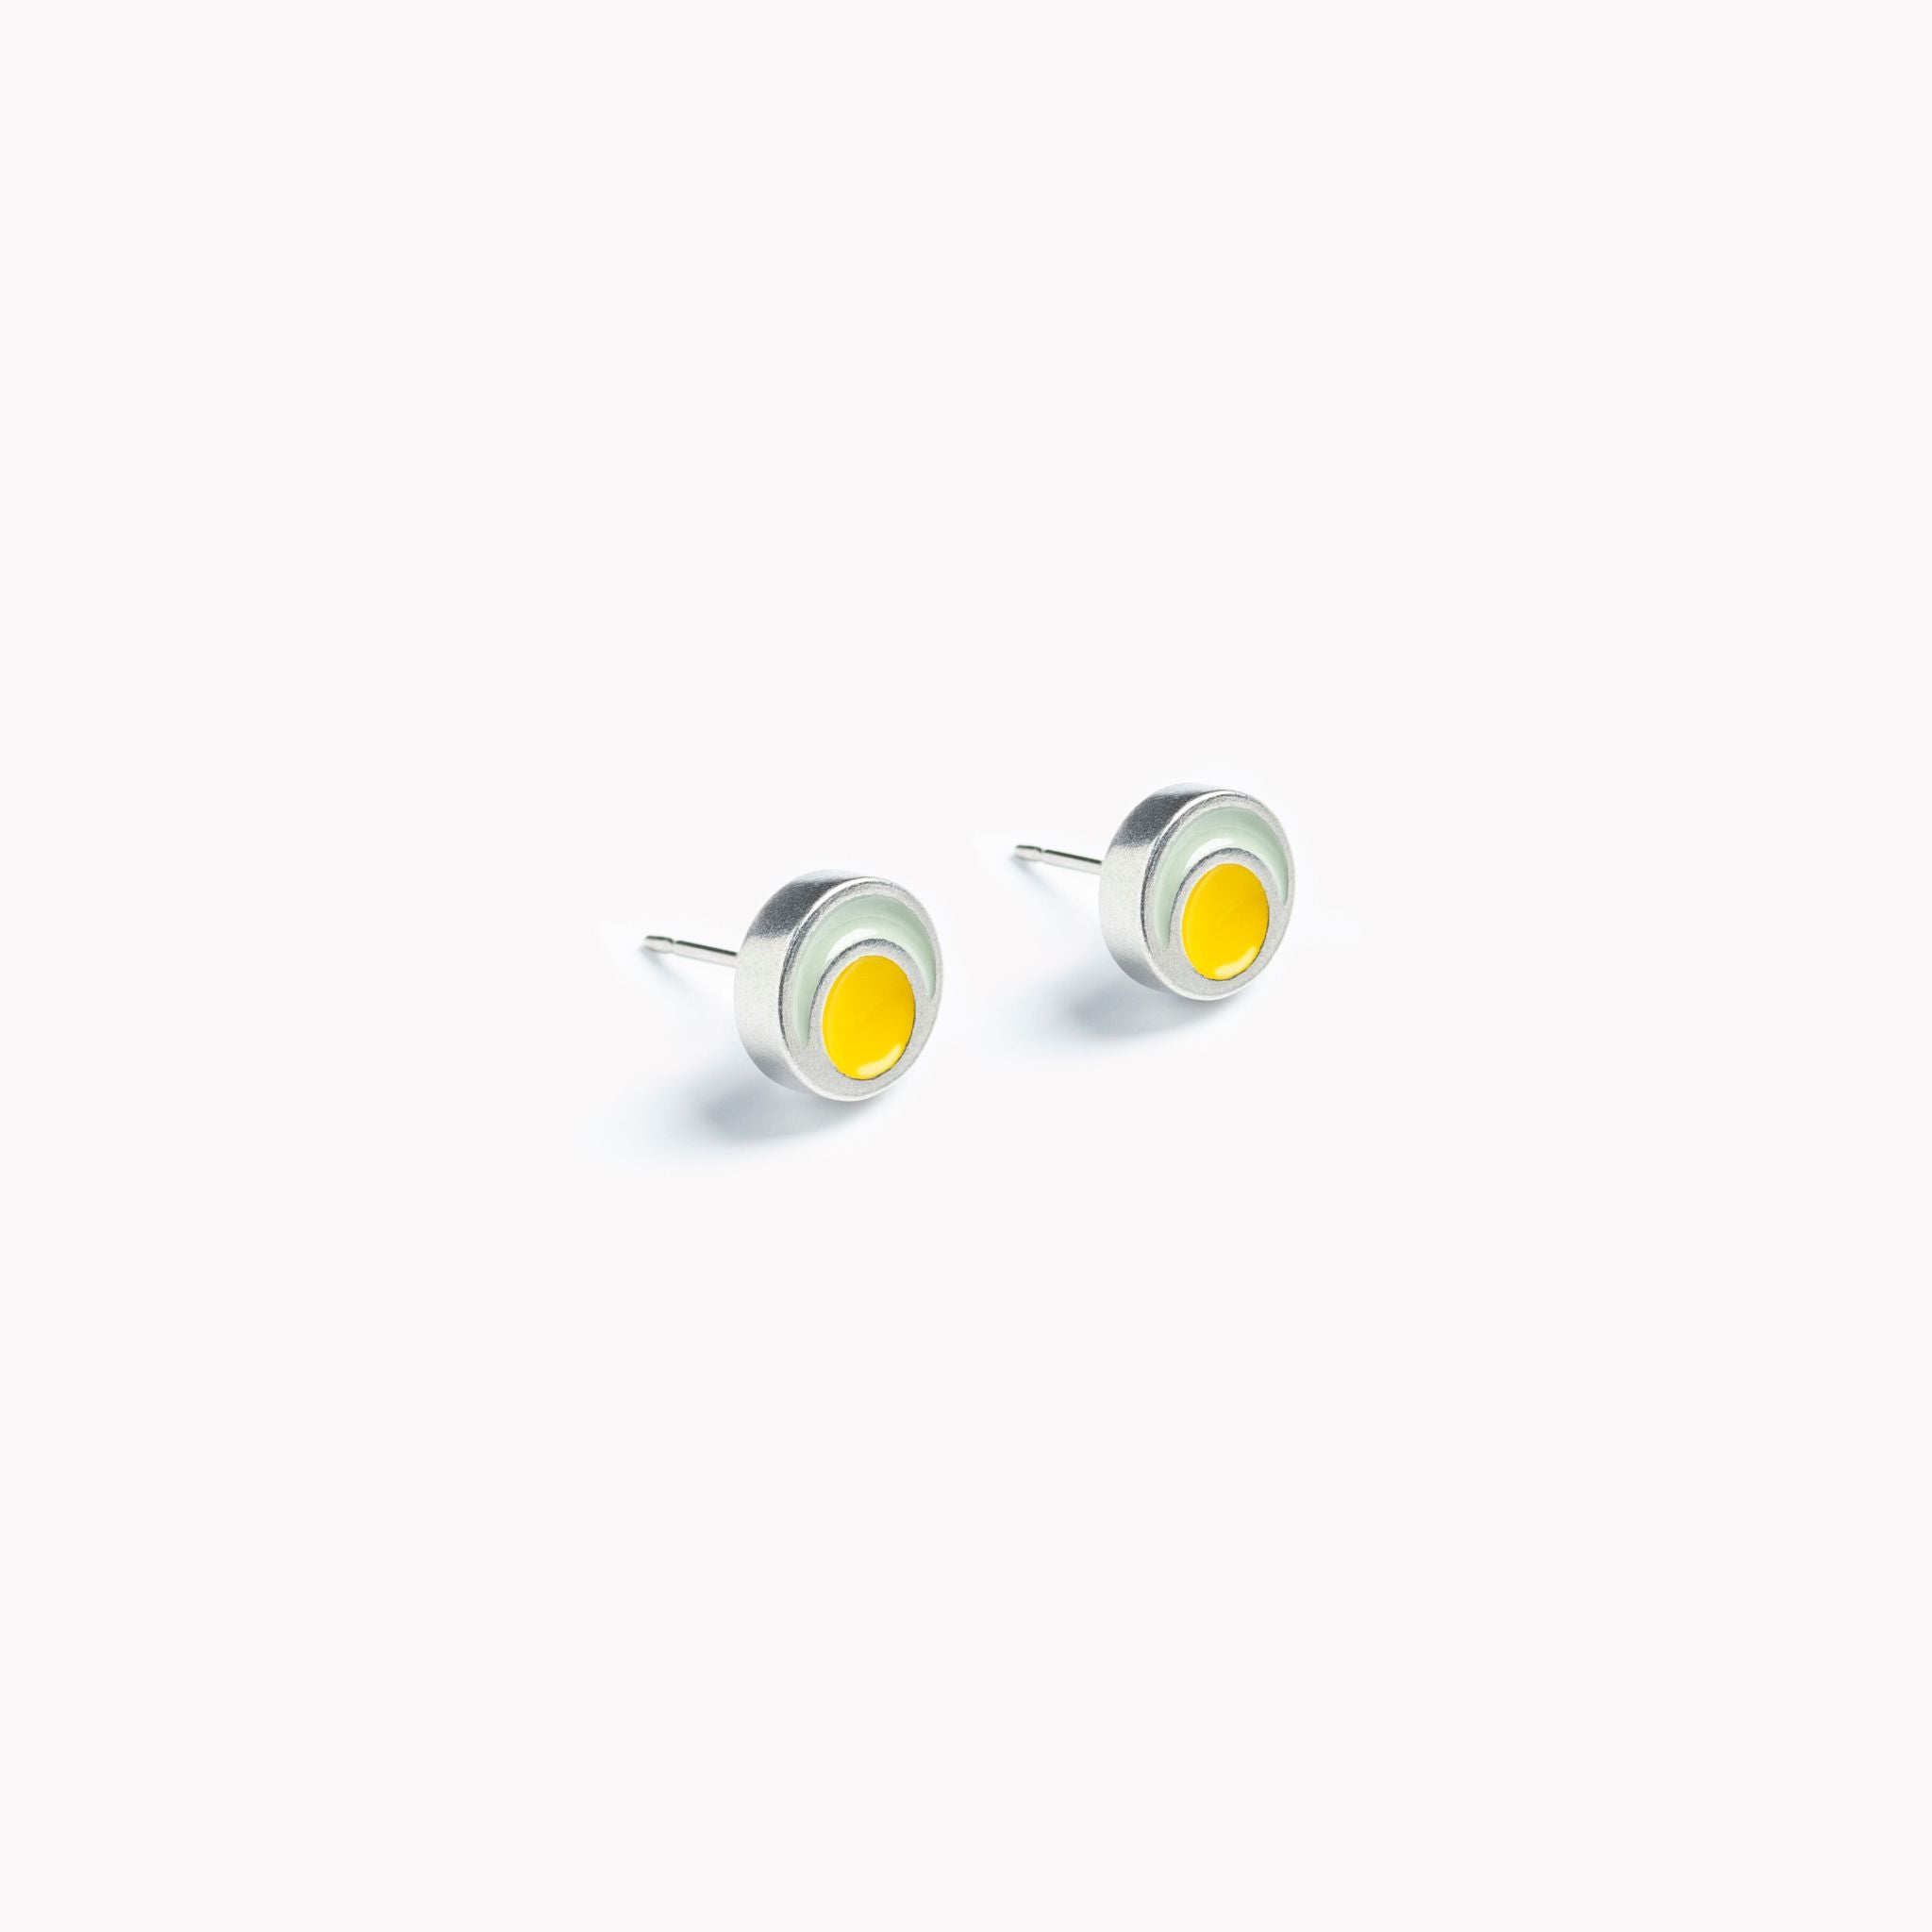 The image shows a pair of simple, vibrant, grey and yellow circular stud earrings. Pictured on a crisp white background, the bright yellow circular inset is surrounded by a pale grey rim leading to a brightly polished pewter edge. The circular stud earrings are bathed in sunlight, showing off the beautifully reflective surface of these minimal, modern and colourful stud earrings.